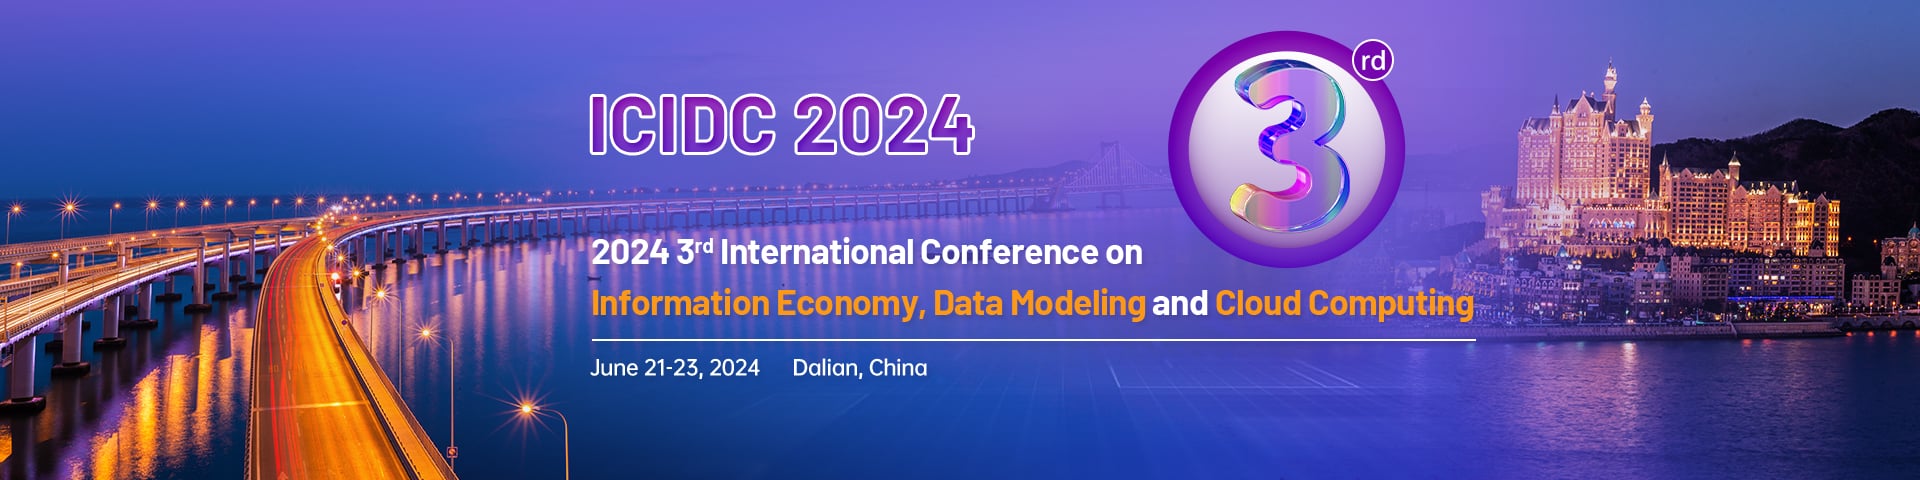 2024 3rd International Conference on Information Economy, Data Modeling and Cloud Computing (ICIDC 2024)